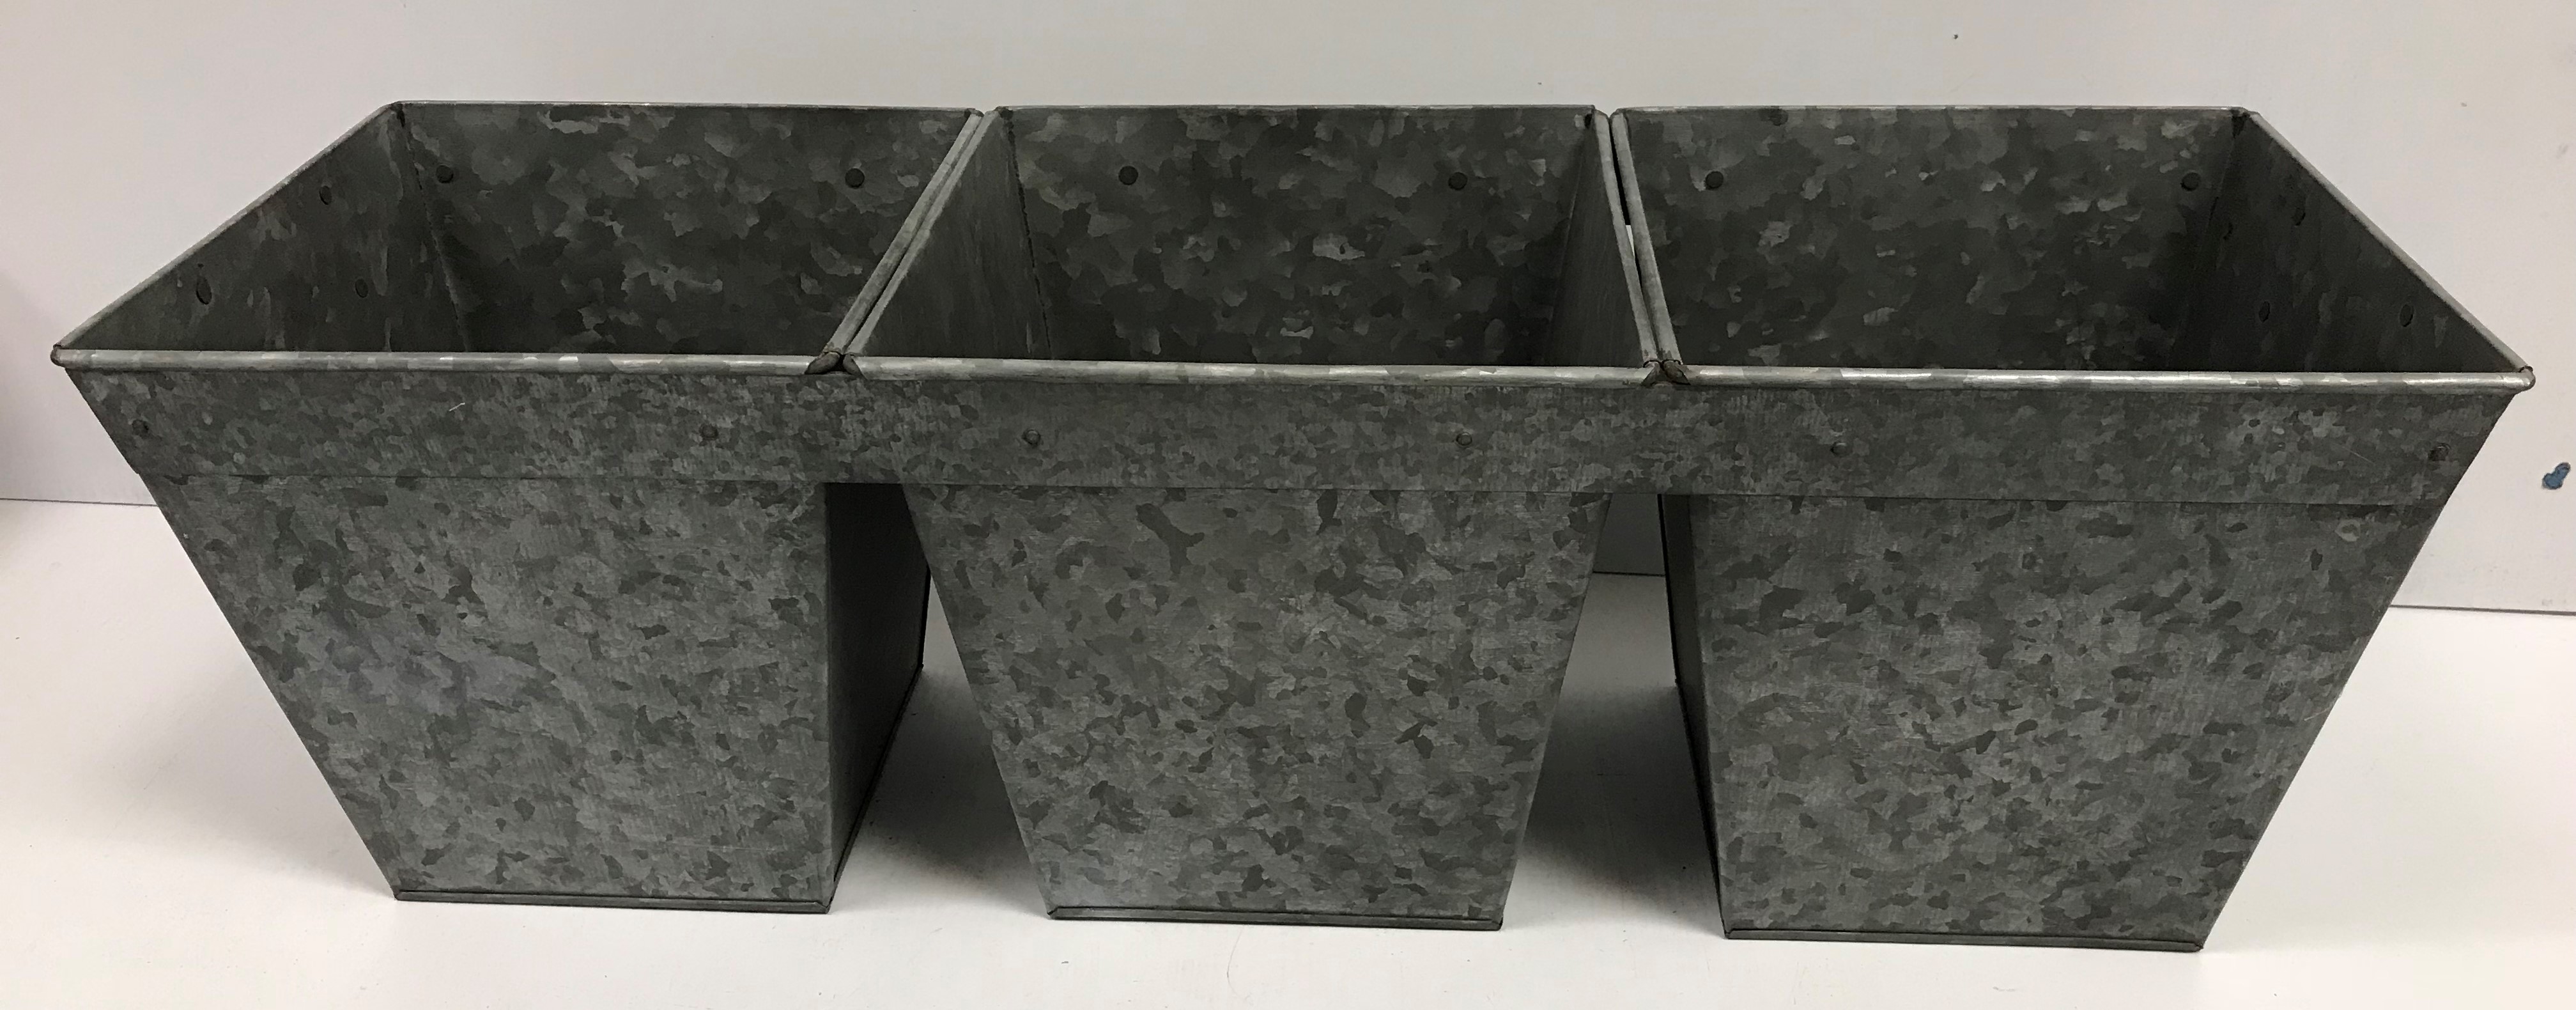 A set of three interconnected galvanised planters - Image 2 of 2